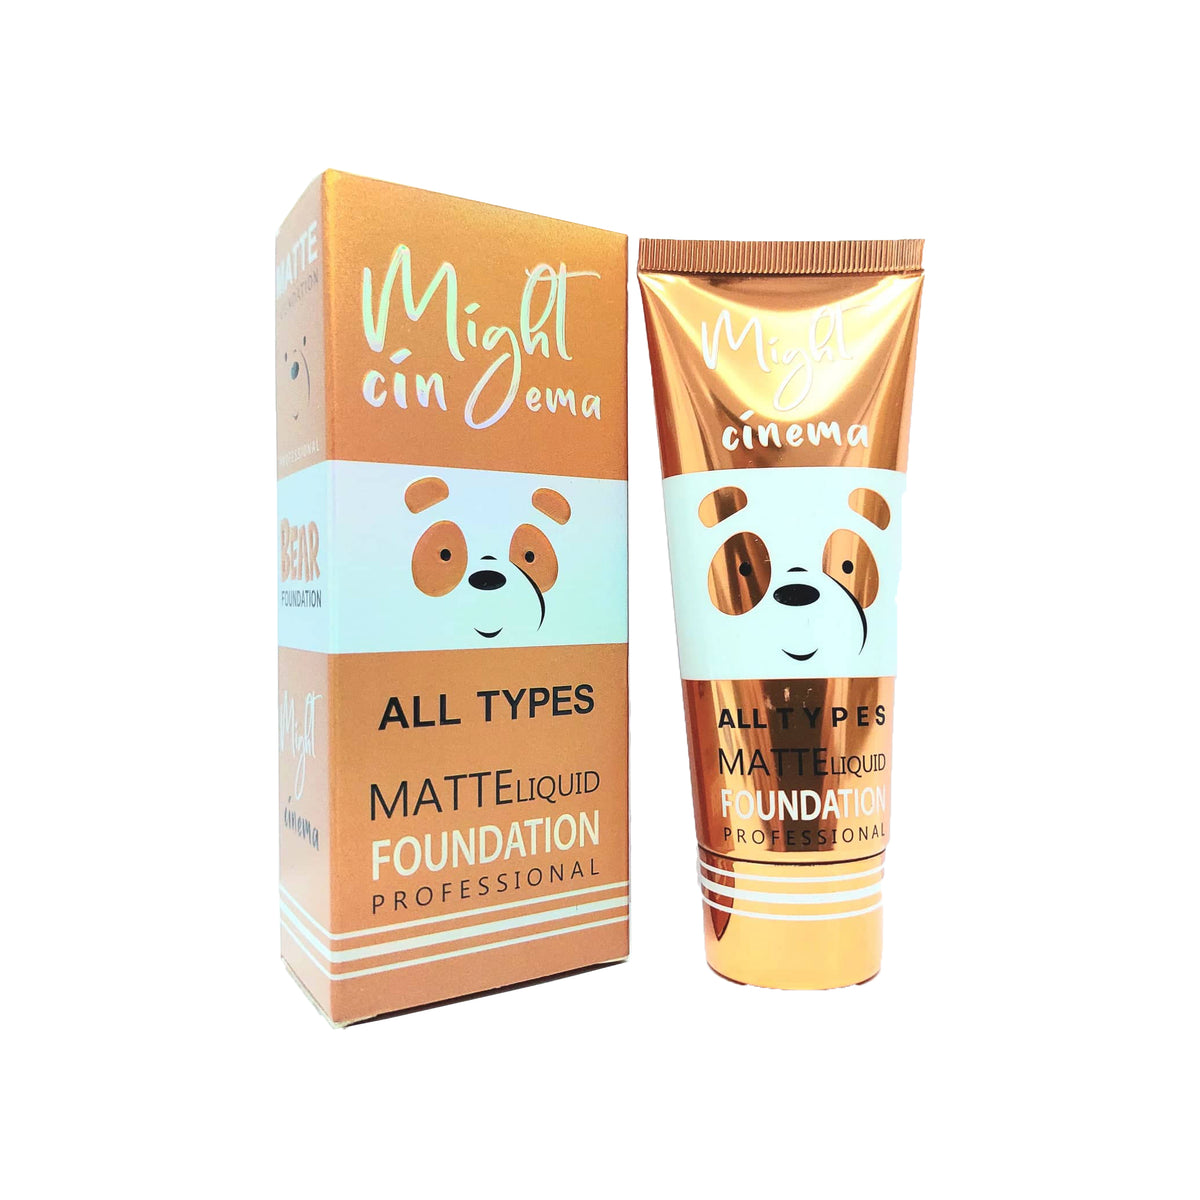 Professional Matte Foundation by Might Cinema - 103 (All Types)